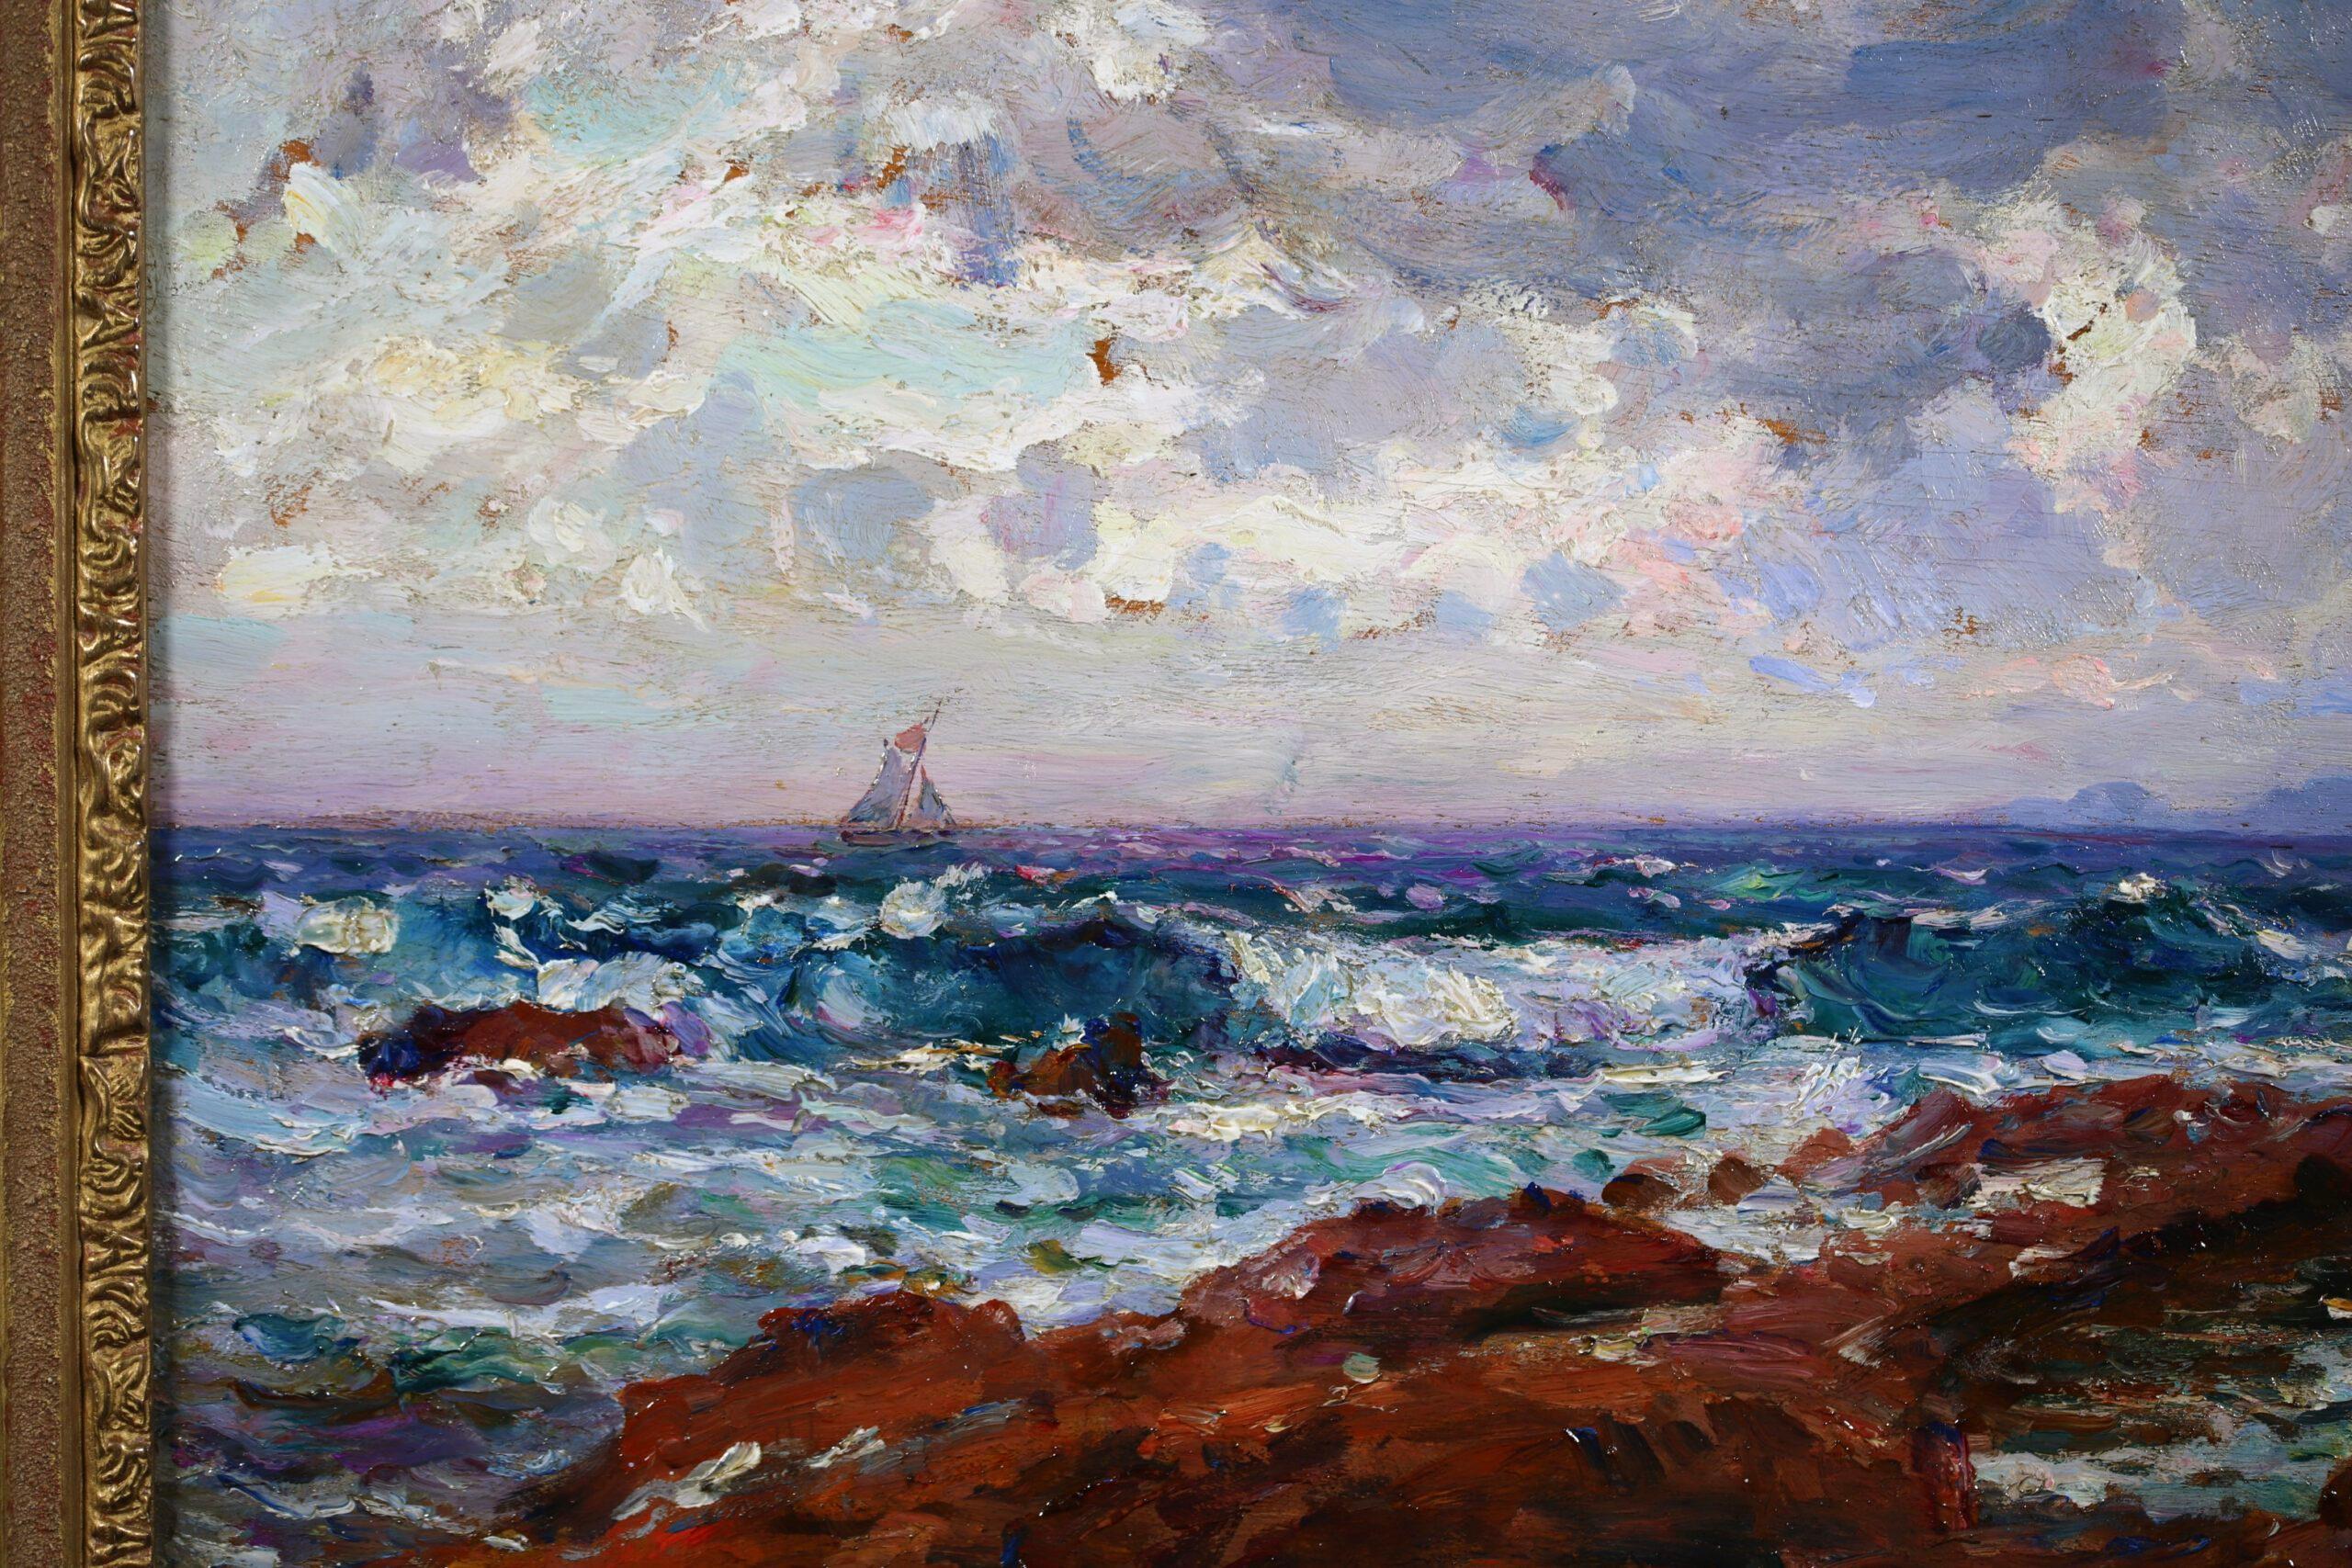 Signed oil on panel seascape circa 1920 by French post impressionist painter Adolphe Louis Gaussen. The work depicts a view of waves cascading against a rocky shore. A sail boat is sailing below cloudy skies.

Signature:
Signed lower right & titled